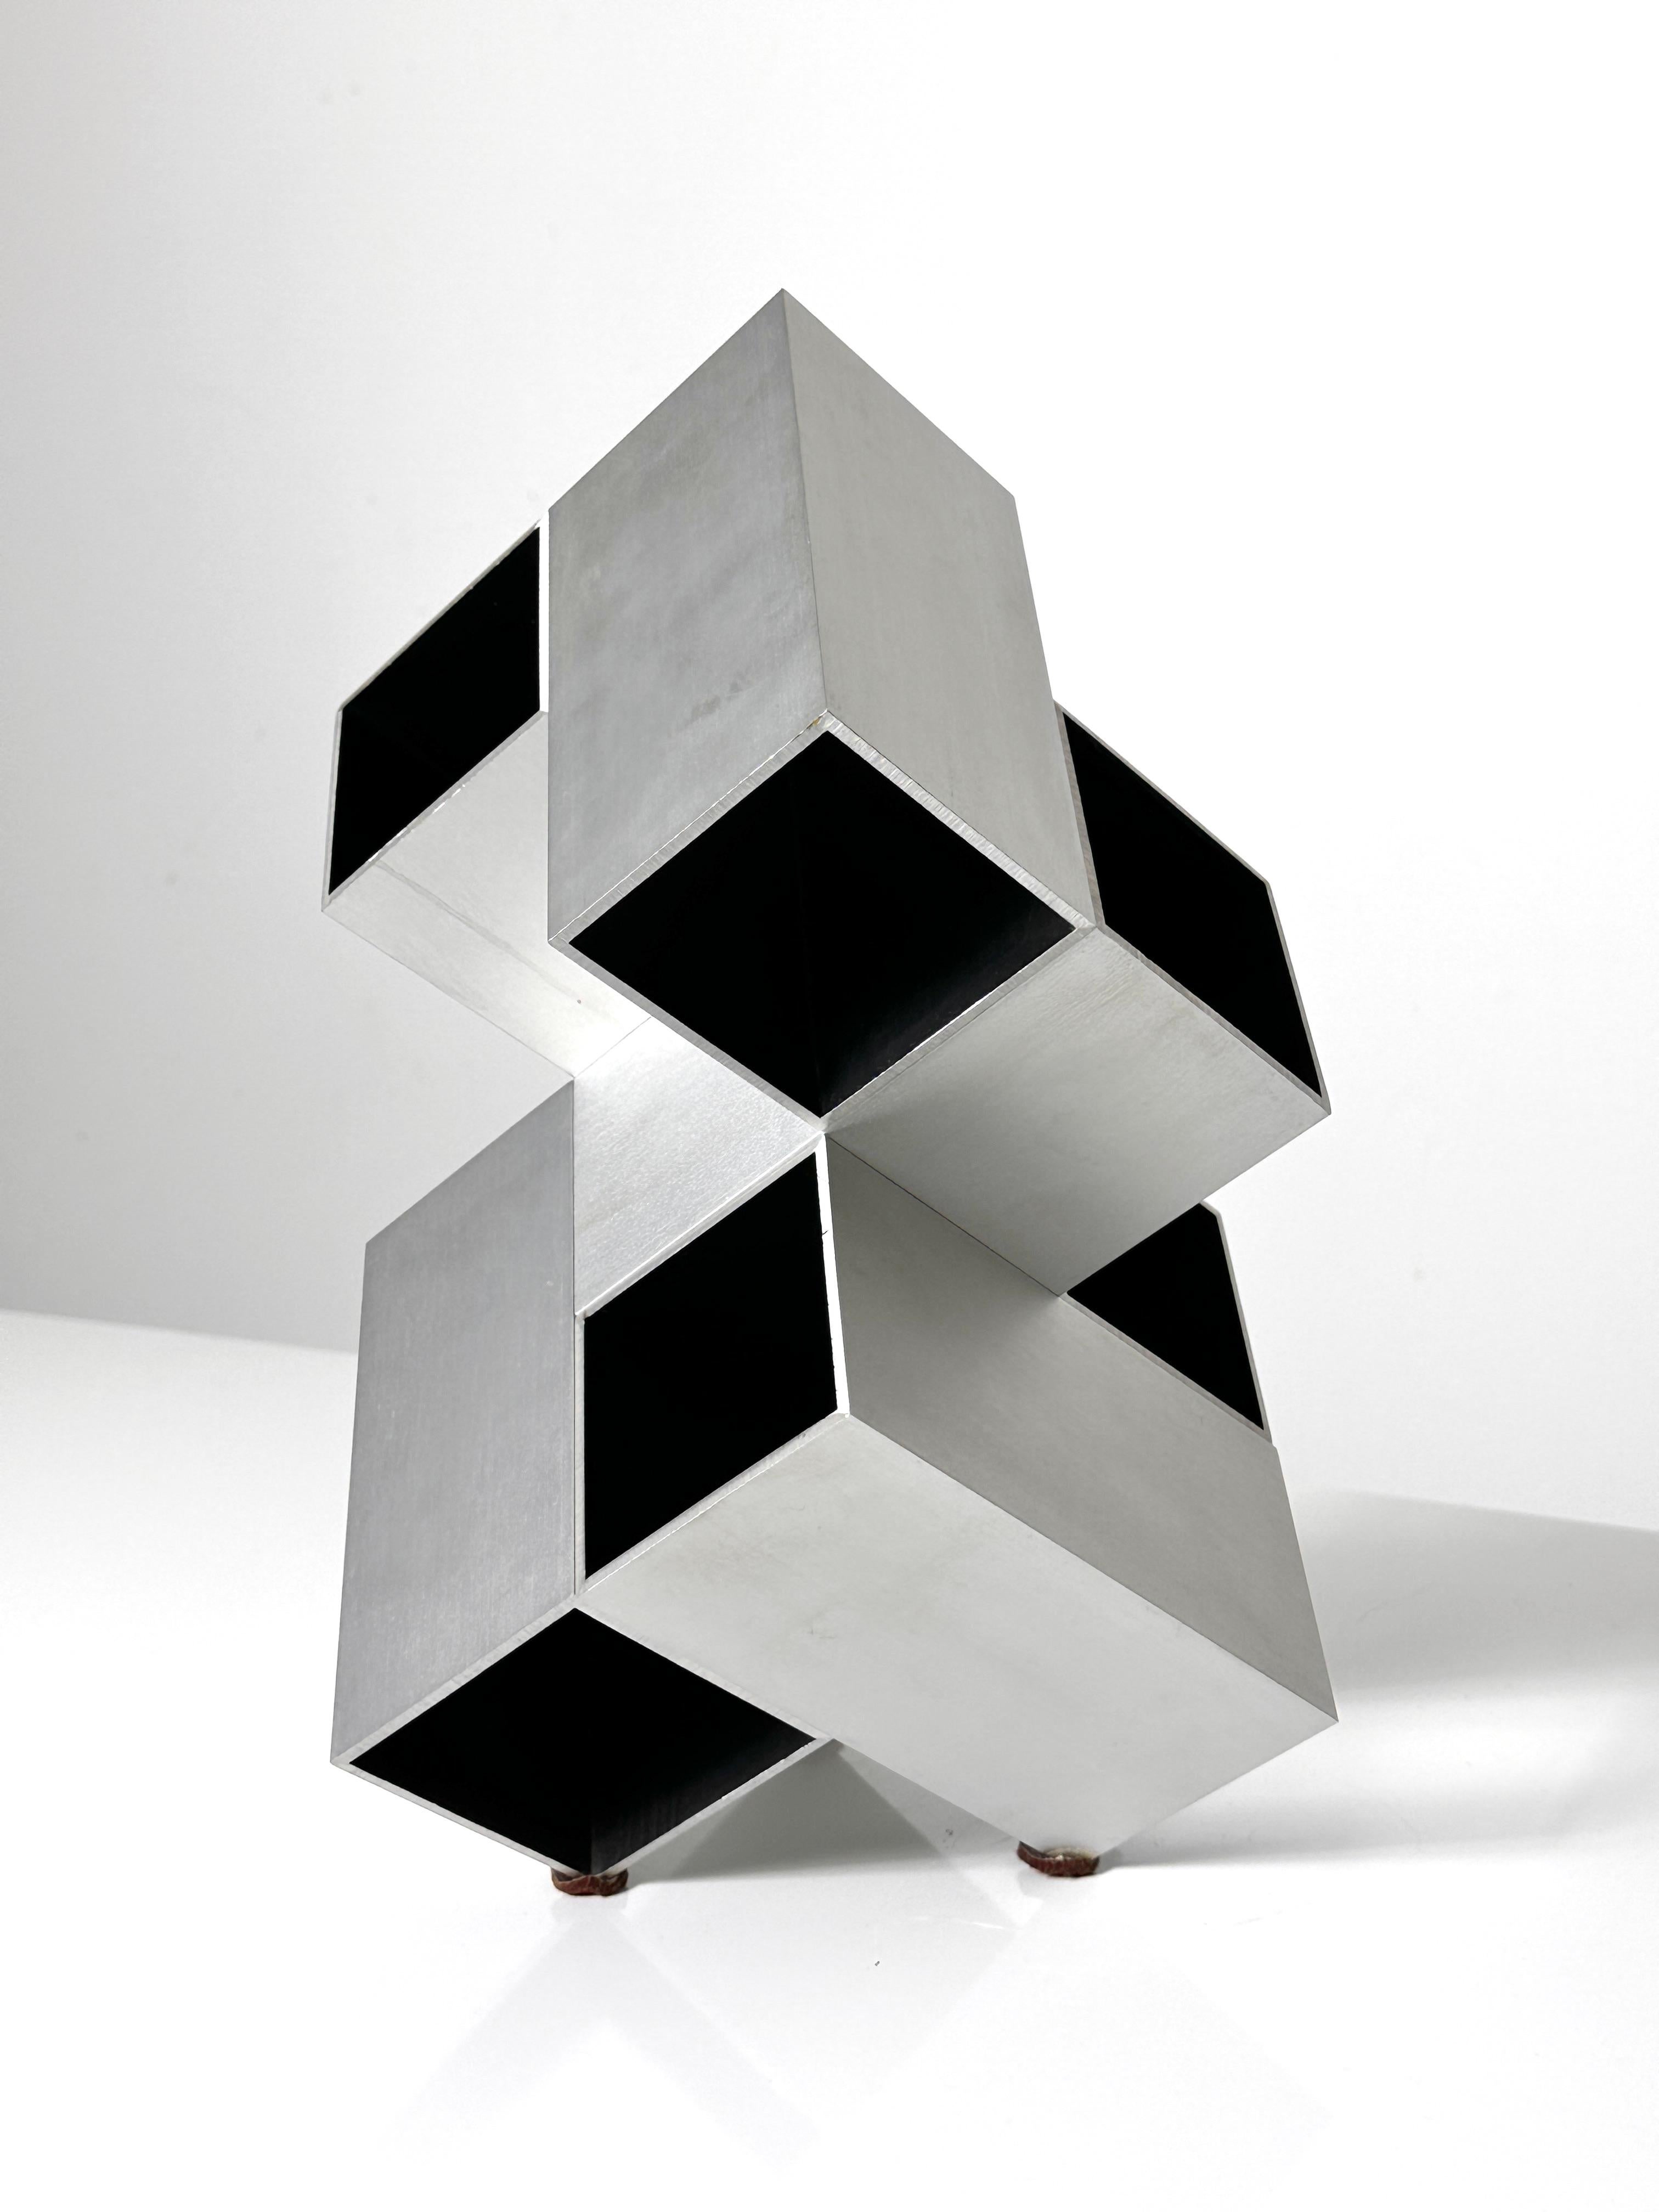 Modular Cube Sculpture by Kosso Eloul Israeli Artist 1920-1995 Toronto Canada  For Sale 3